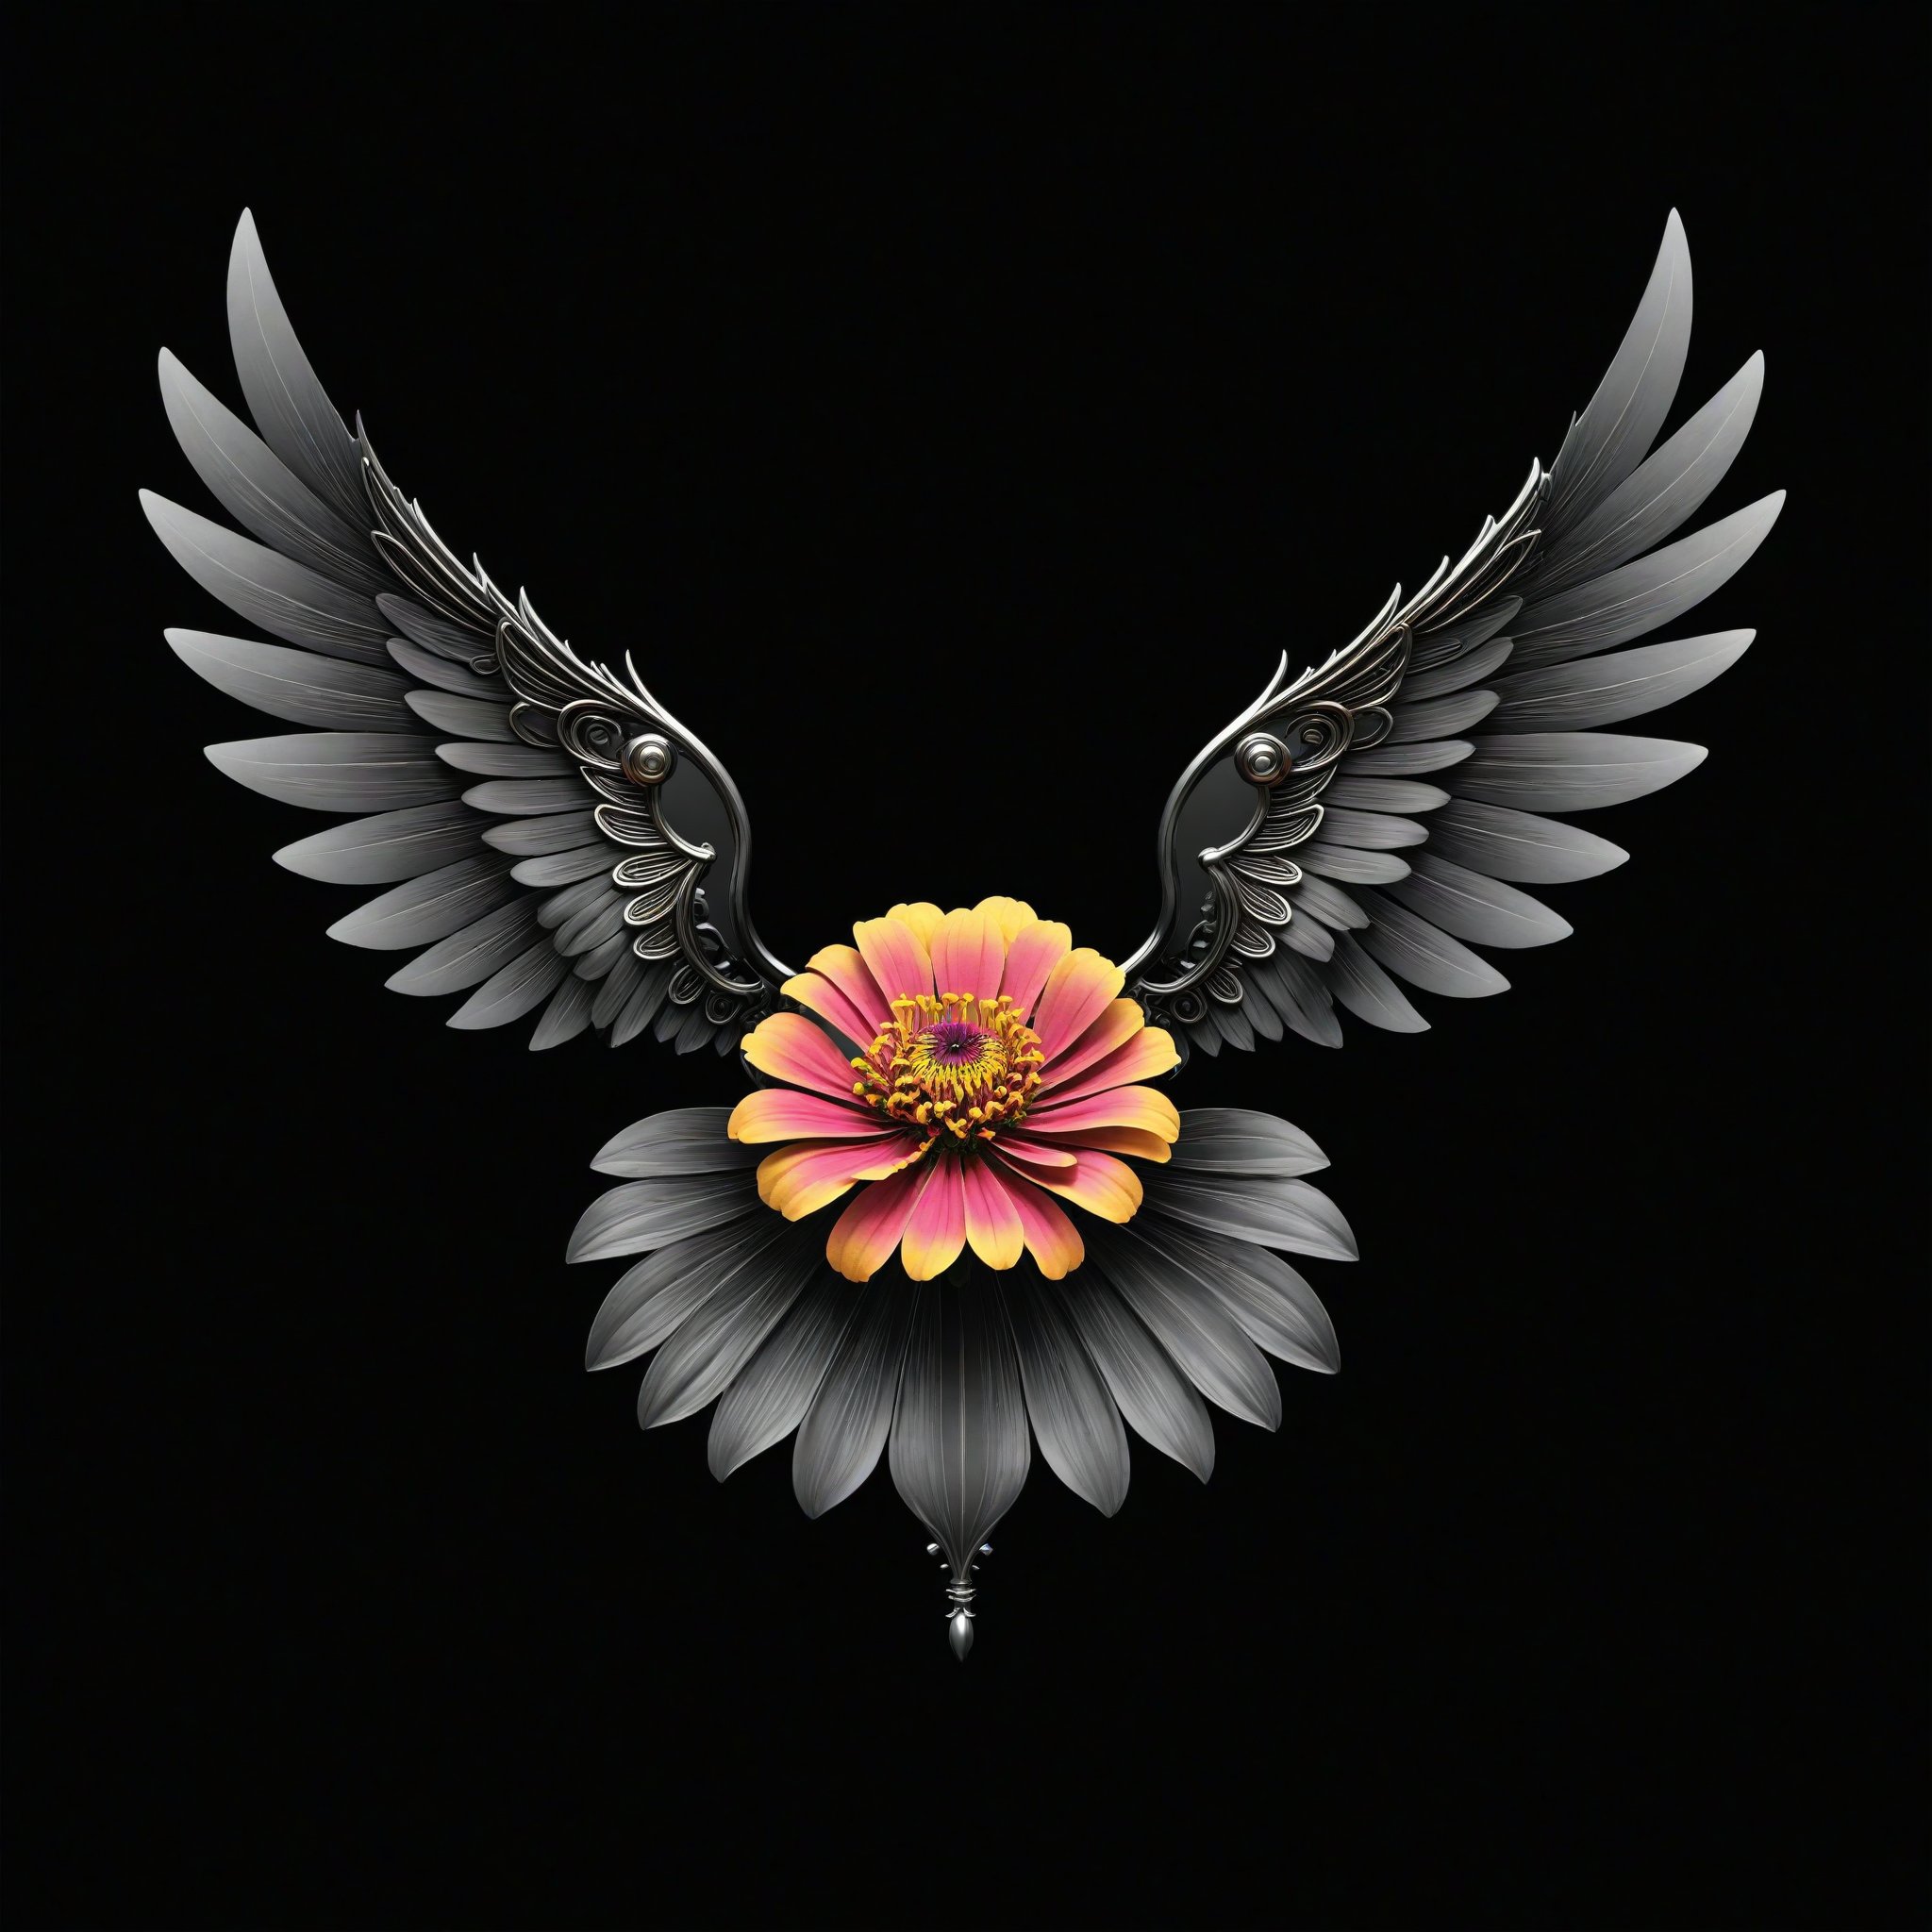 a zinnia flower whit wing majestic with clasic ornament Mechanical lines Elegance T-shirt design, BLACK BACKGROUND